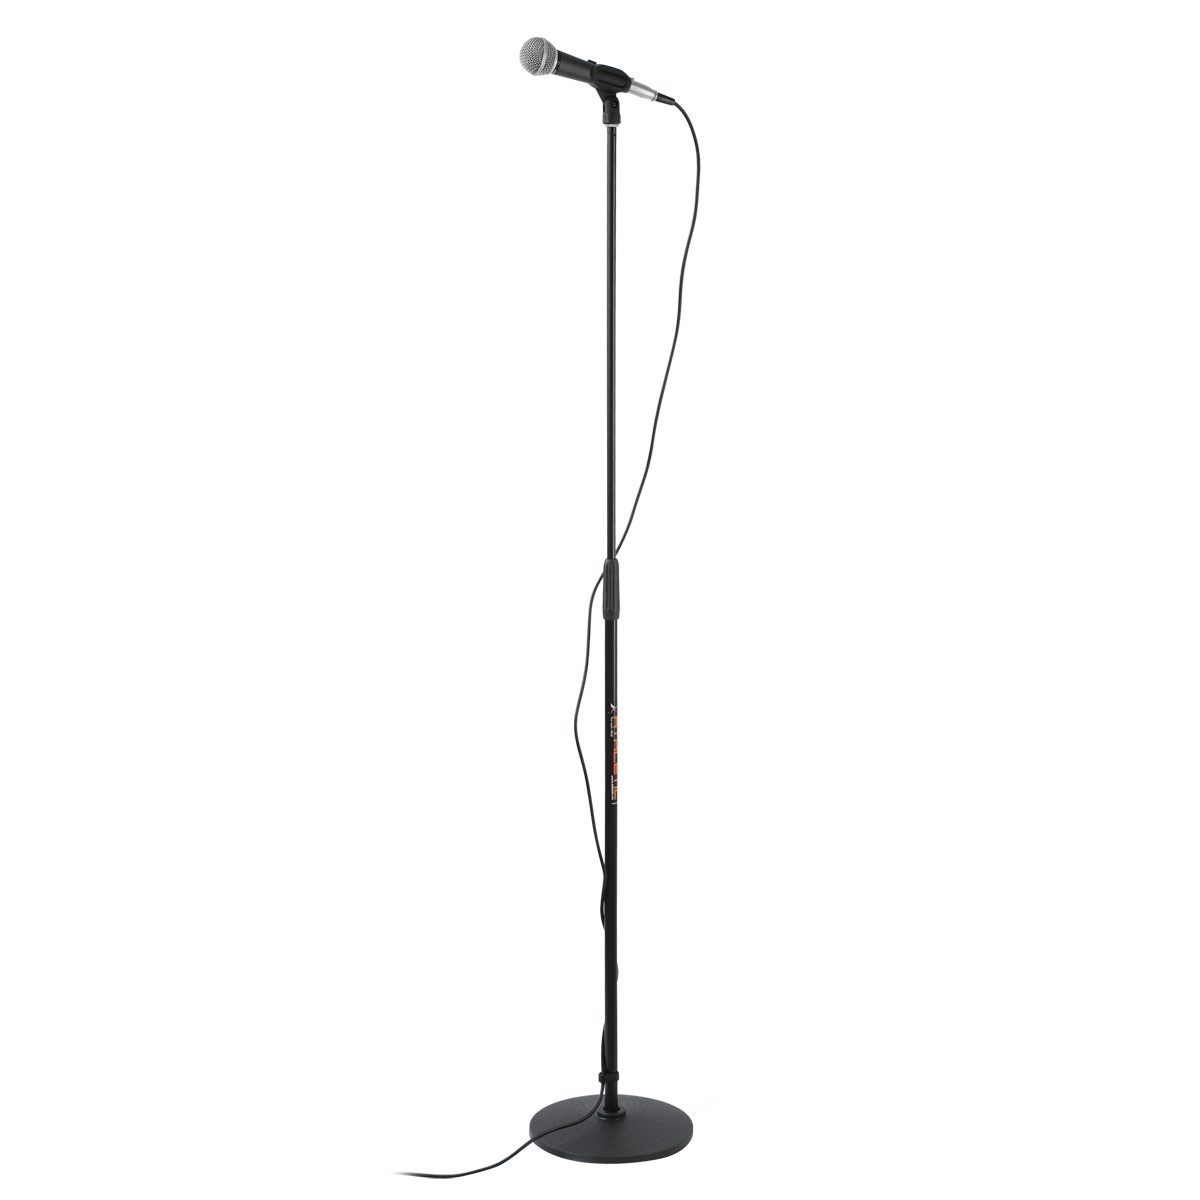 Microphone and Stand